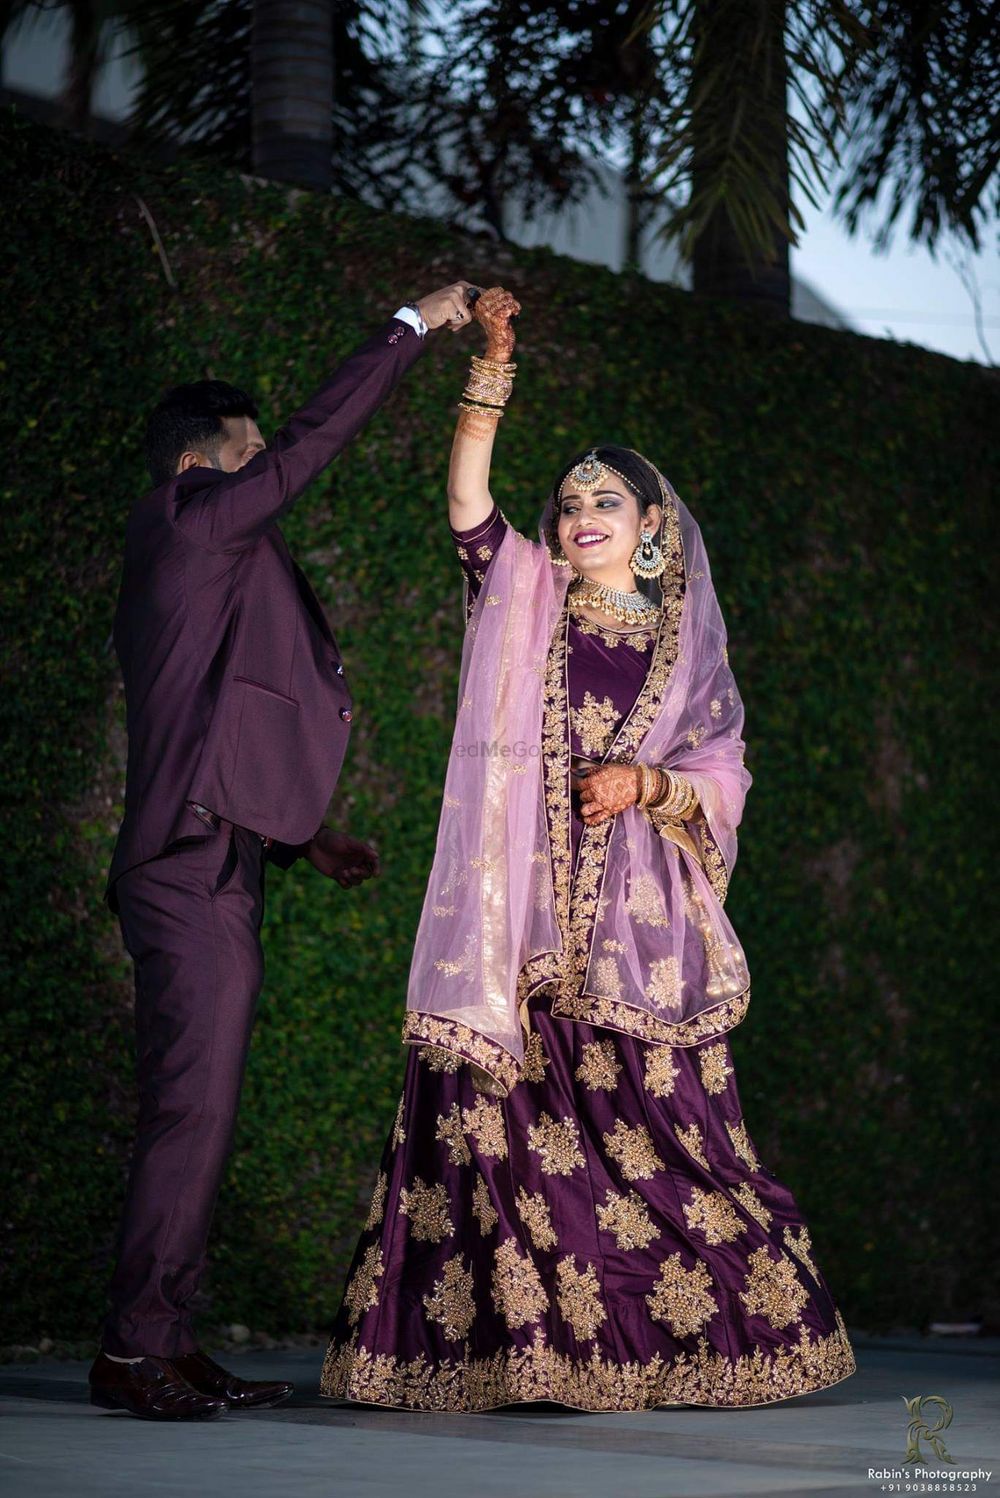 Photo From Muslim Wedding - By Rabins Photography